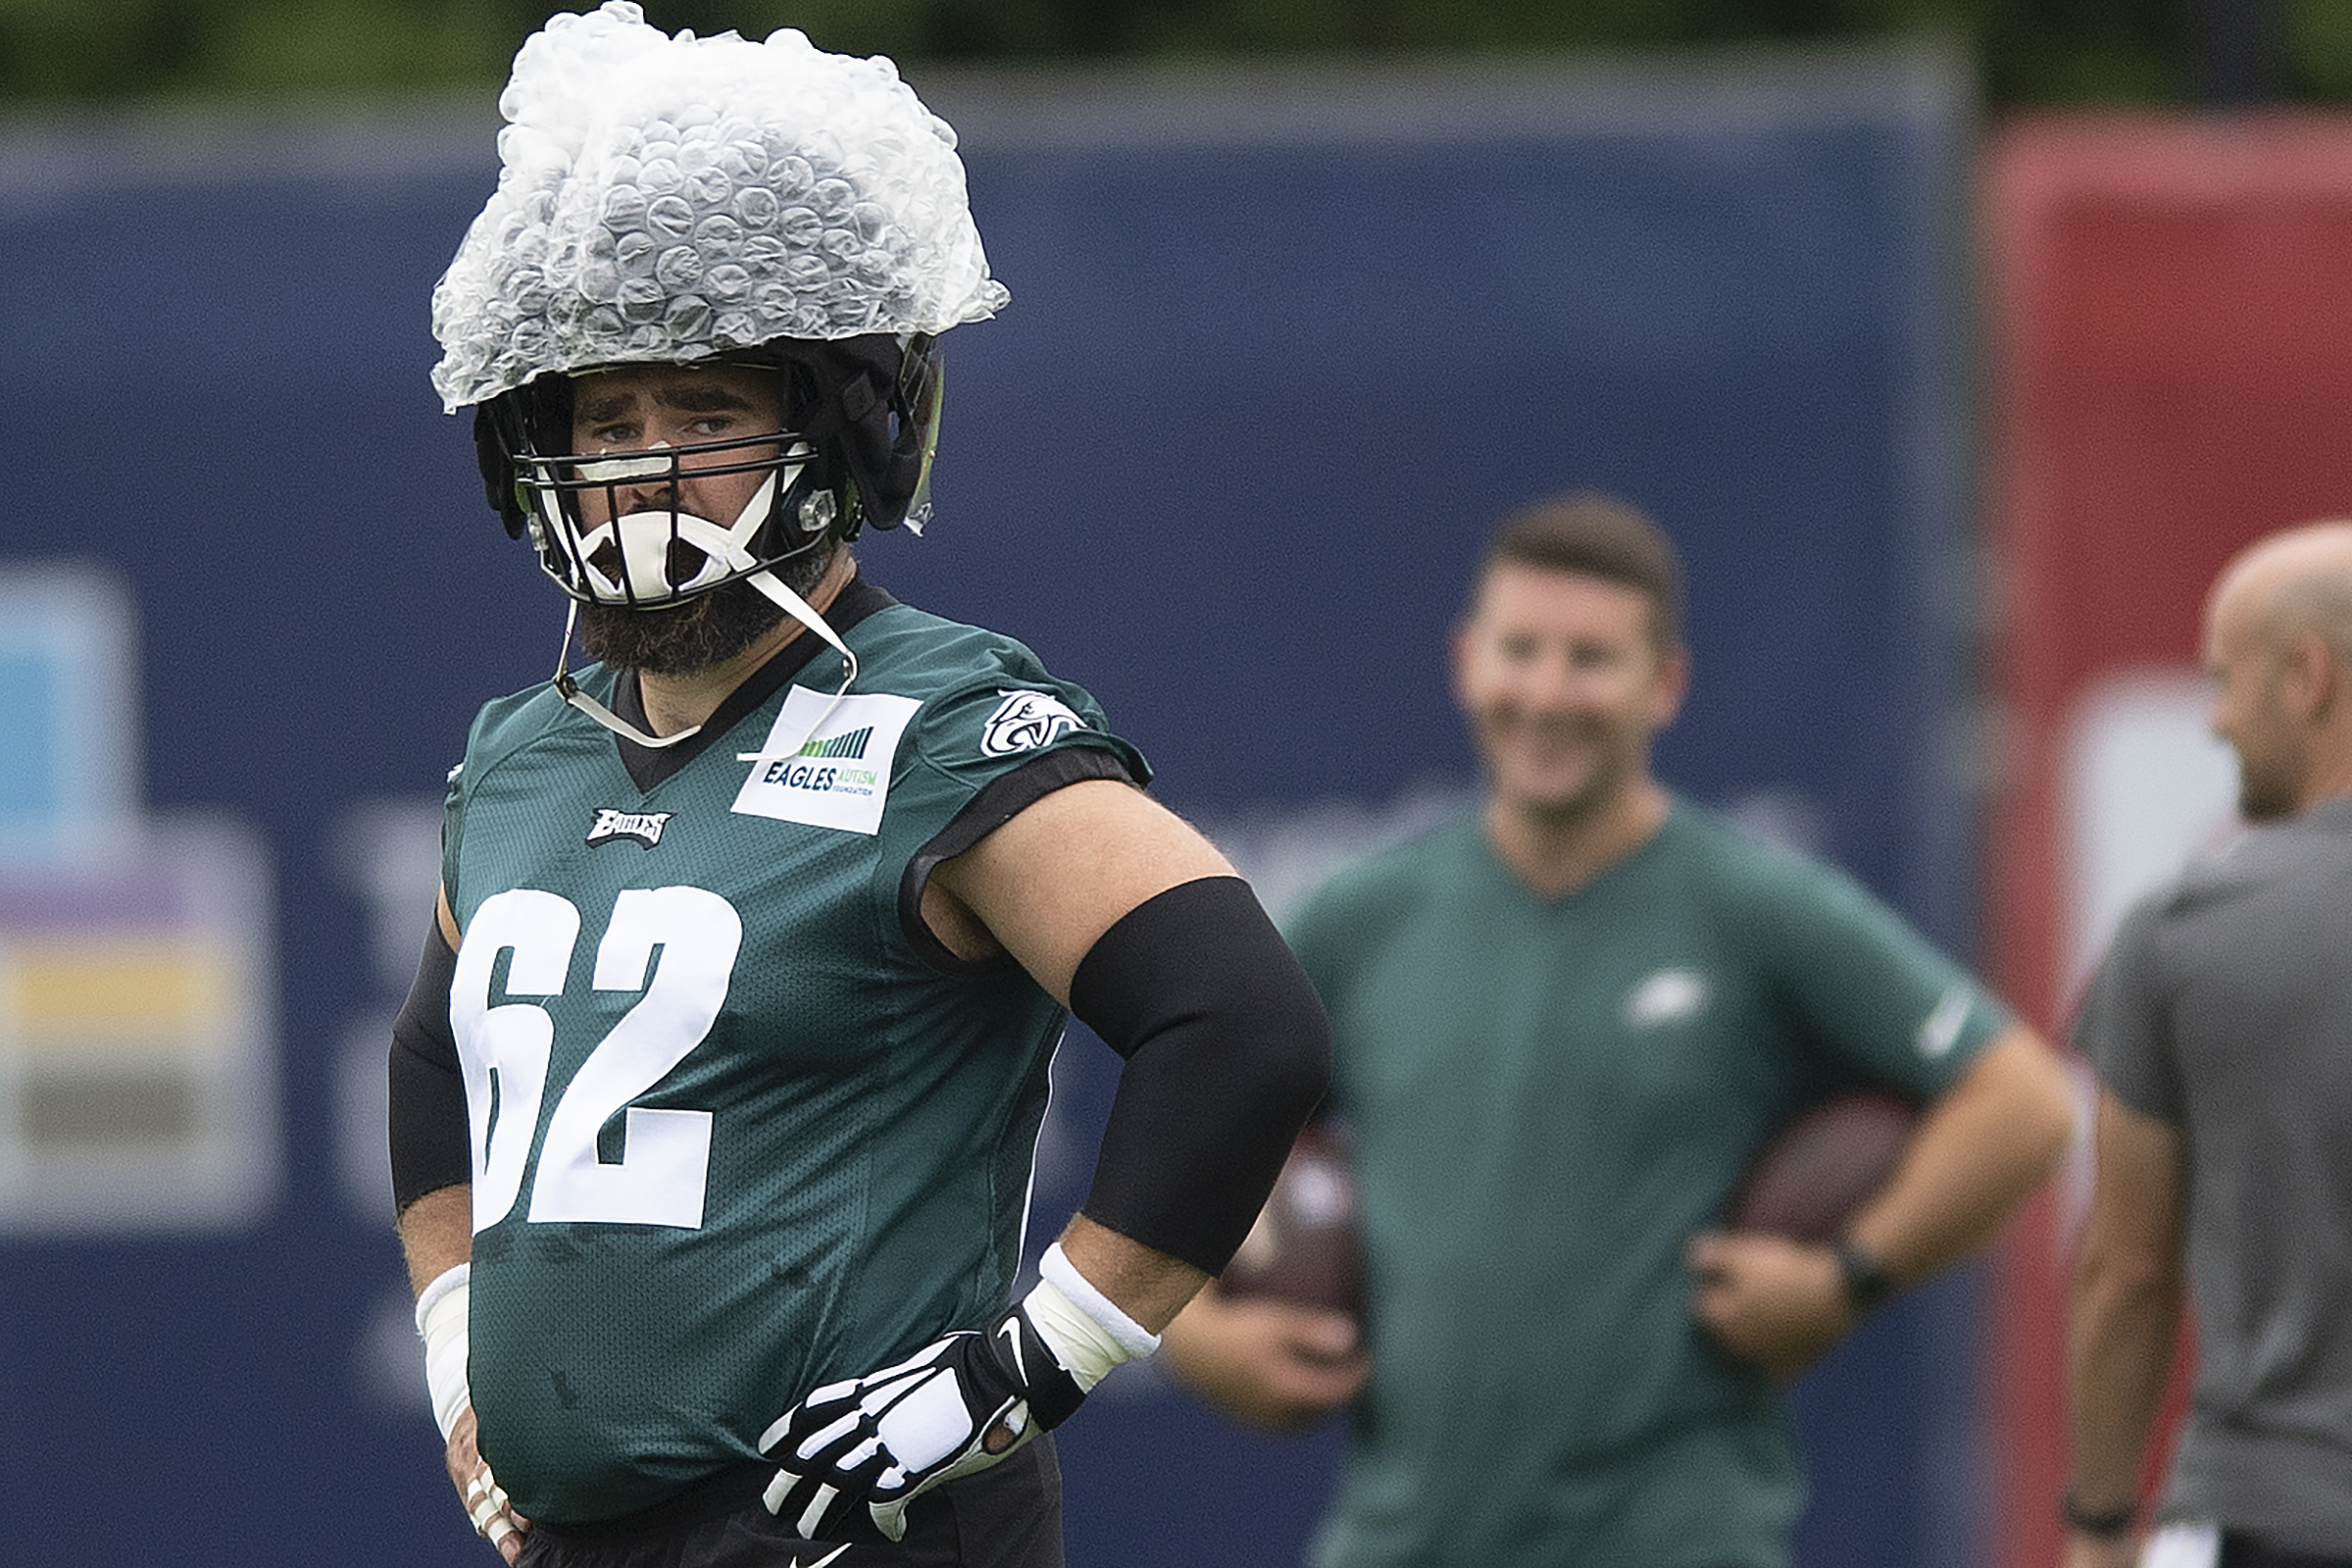 Large Bubble Helmets Are Guardian Caps, NFL's New Safety Measure